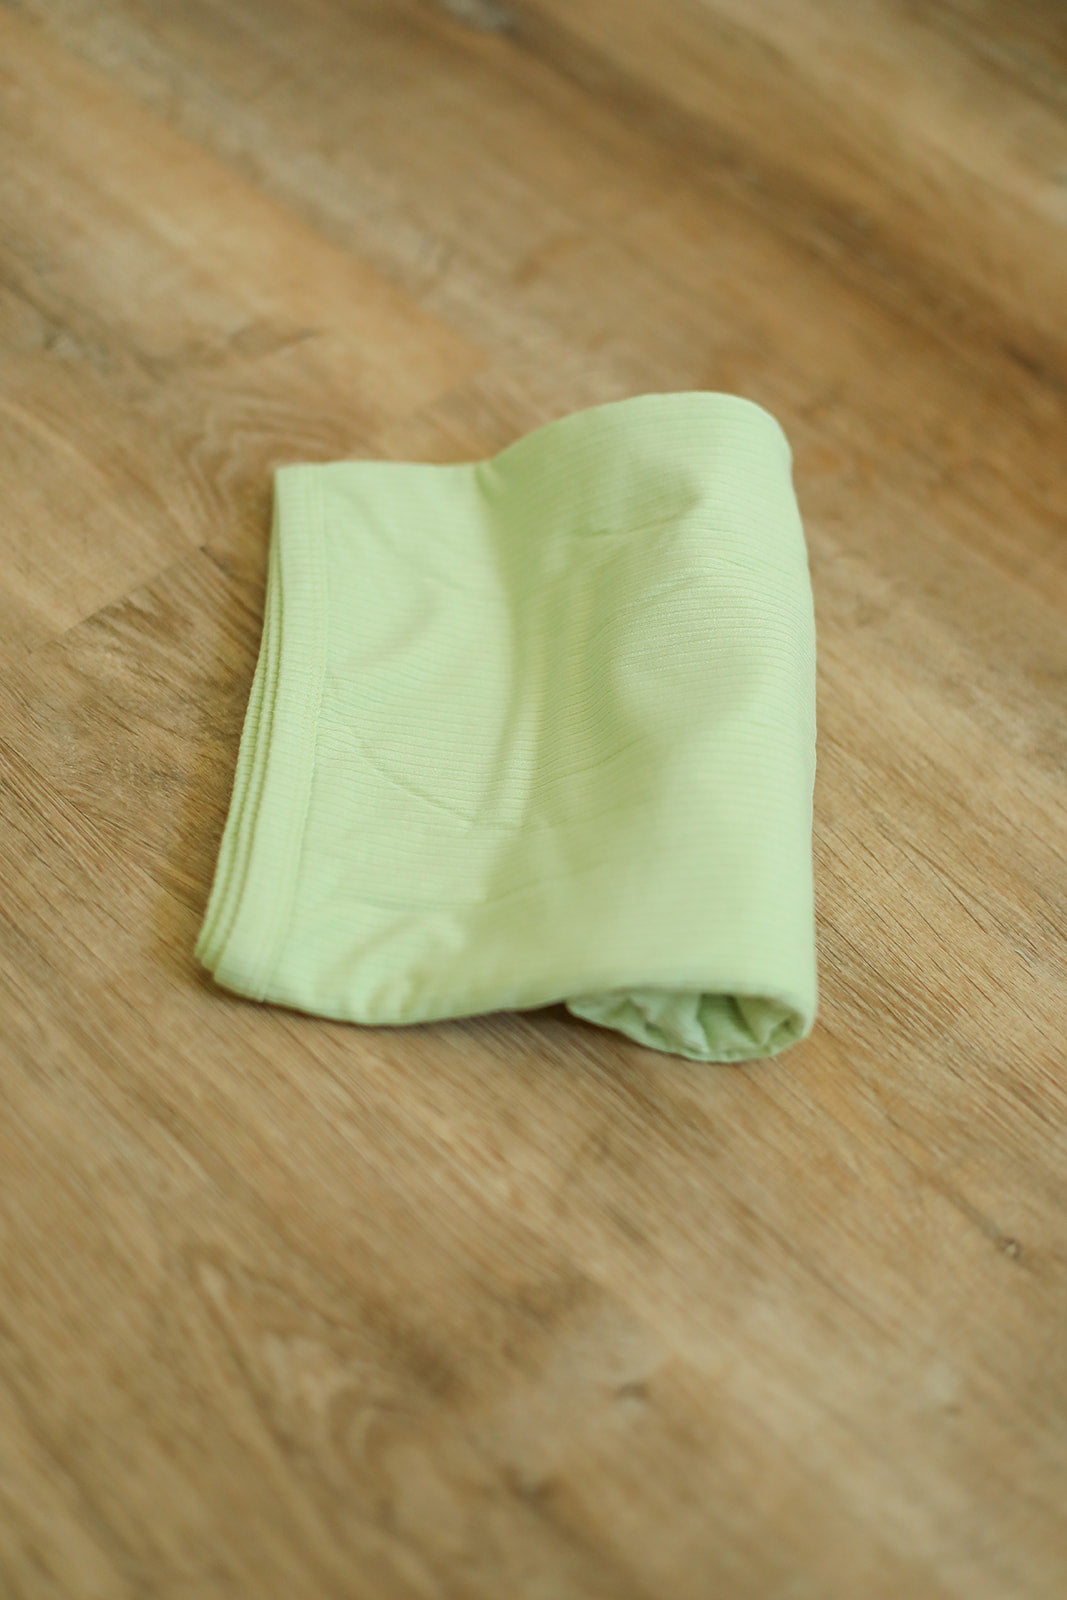 Keylime Ribbed Solid Bamboo Swaddle Blanket